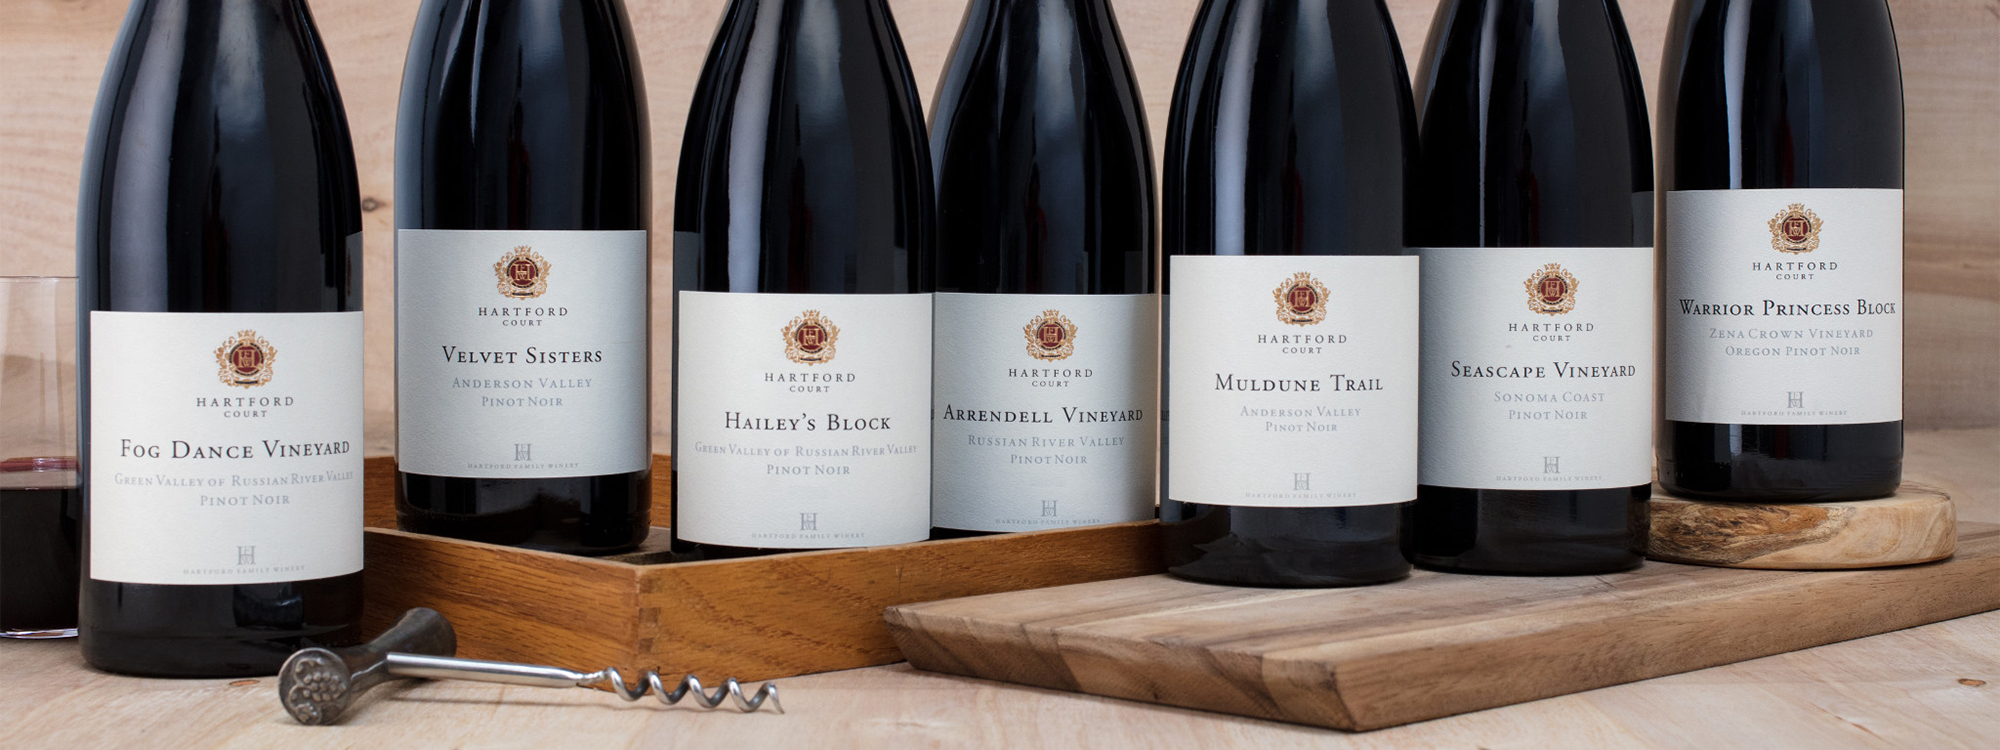 Lineup of Hartford Pinot Noir releases